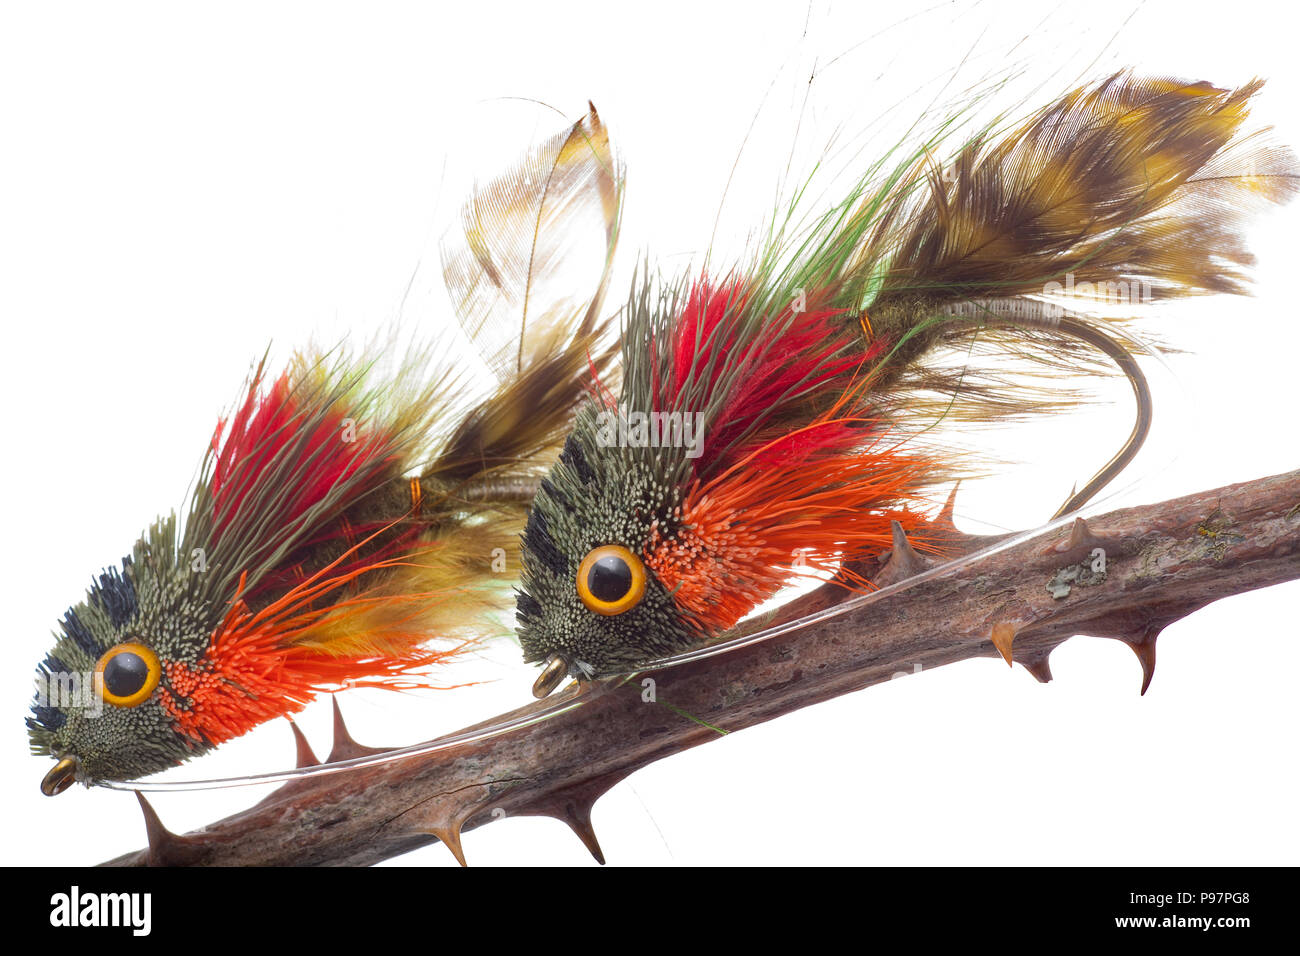 https://c8.alamy.com/comp/P97PG8/large-fishing-flies-designed-for-catching-predatory-fish-such-as-pike-esox-lucius-photographed-in-a-studio-on-a-white-background-dorset-england-uk-P97PG8.jpg